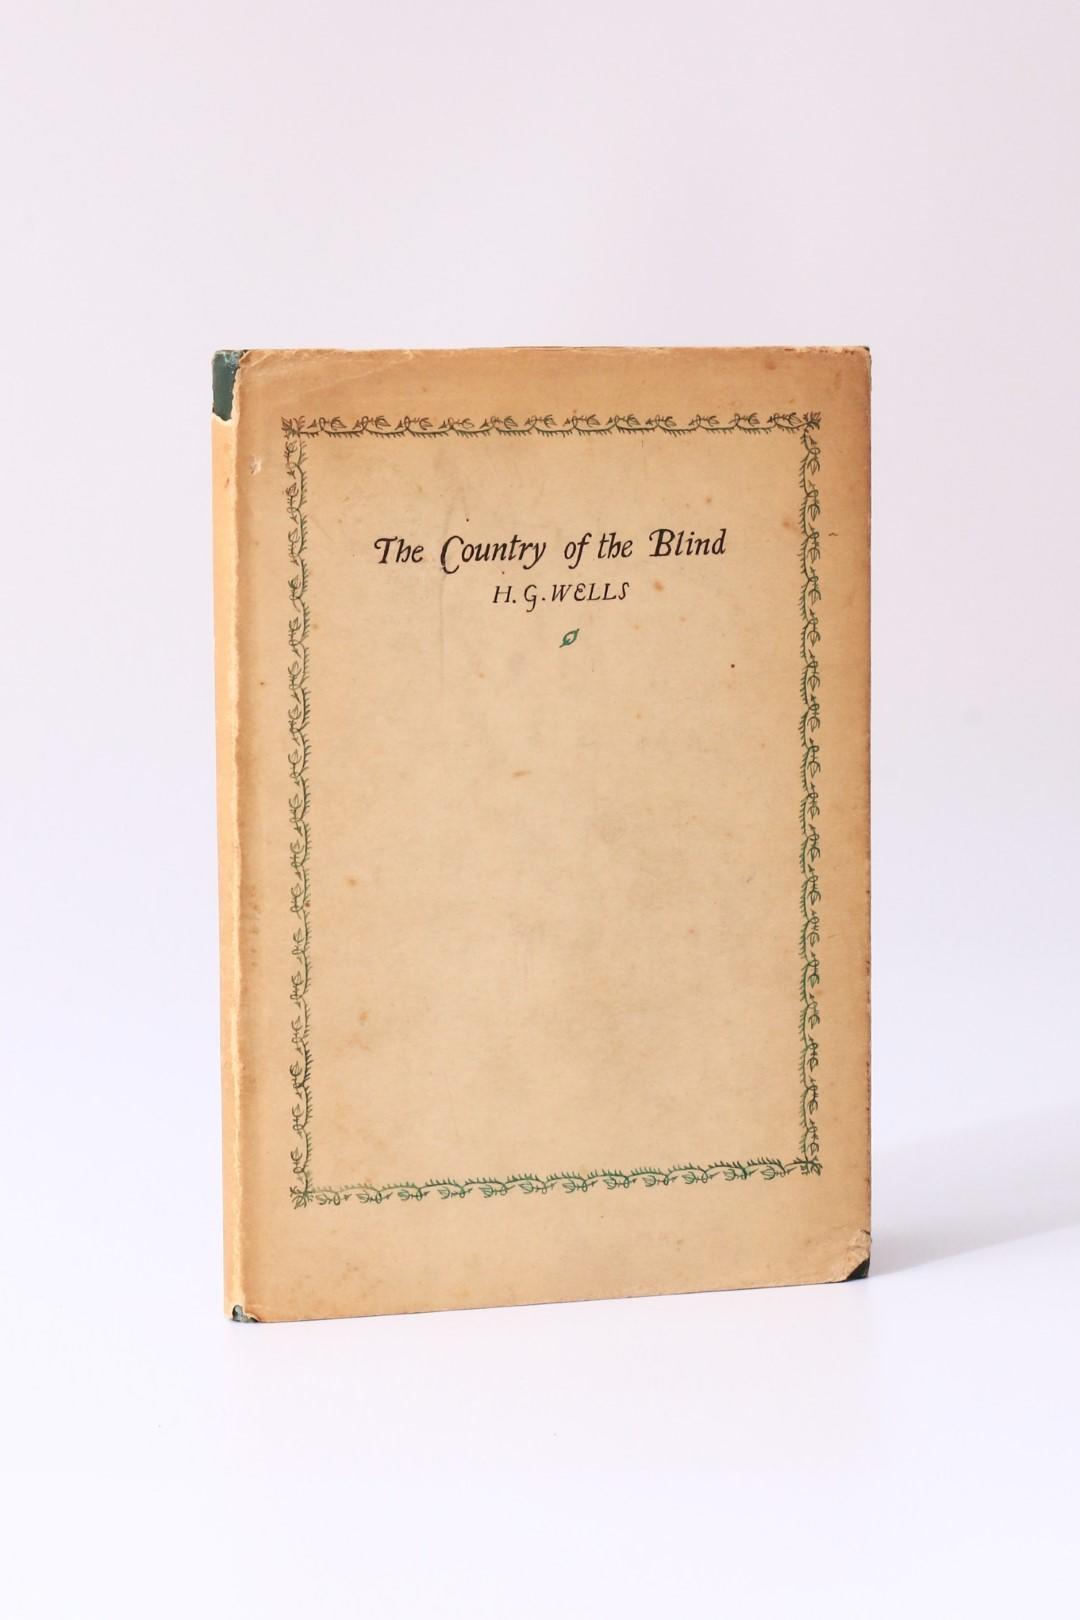 H.G. Wells - The Country of the Blind - A Typed Copy - None, 1925, Manuscript.